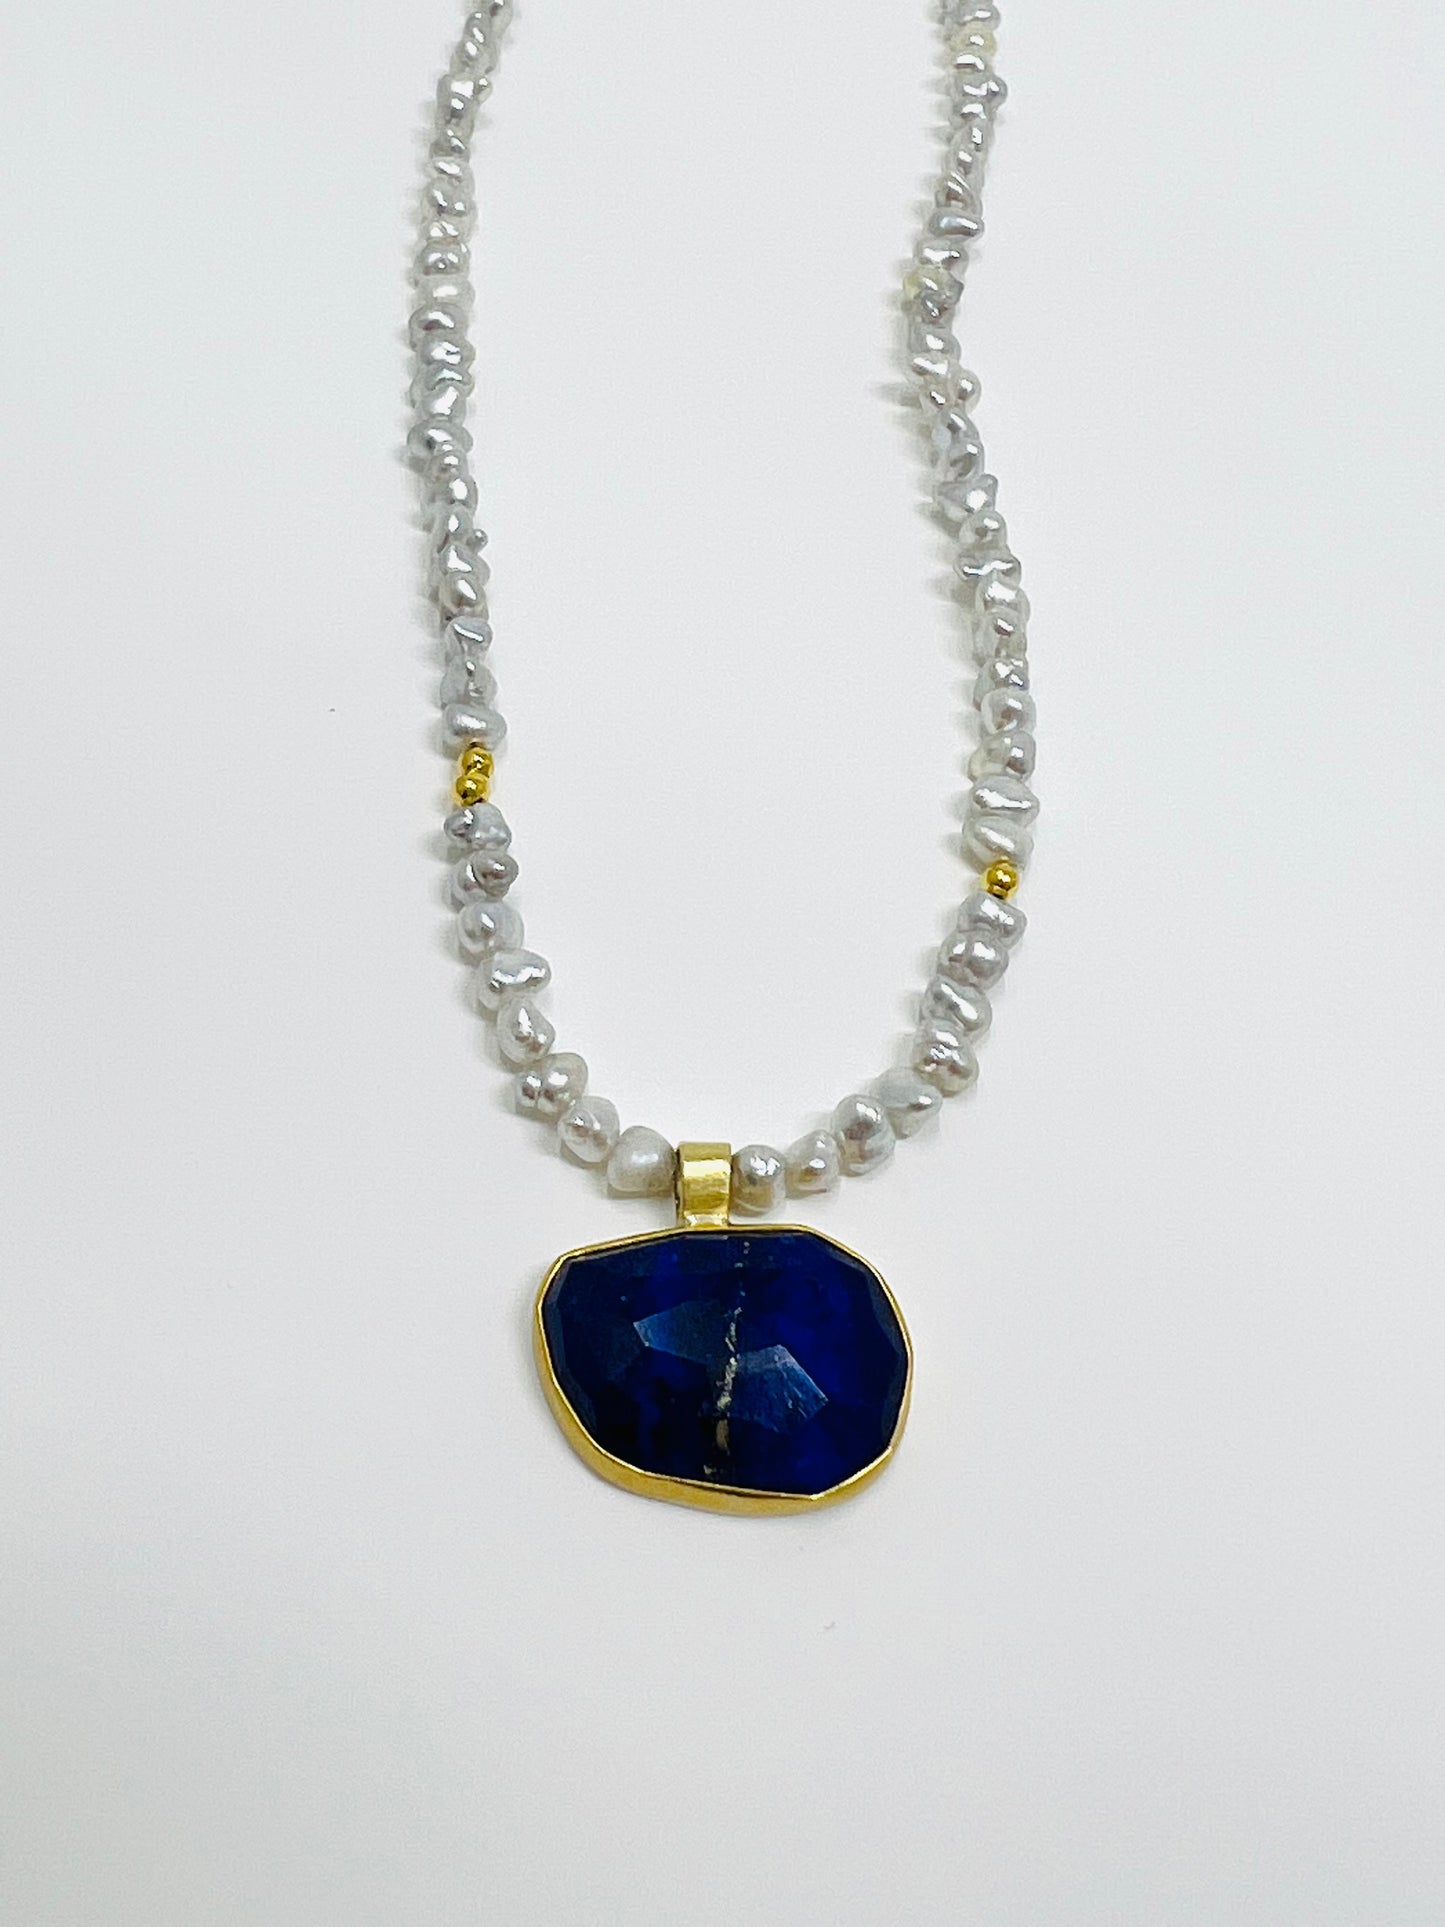 Lapis 9 cts, Keshi pearls, 22k bezel, 22k beads, 18 bail, clasp, jump rings, ss Necklace